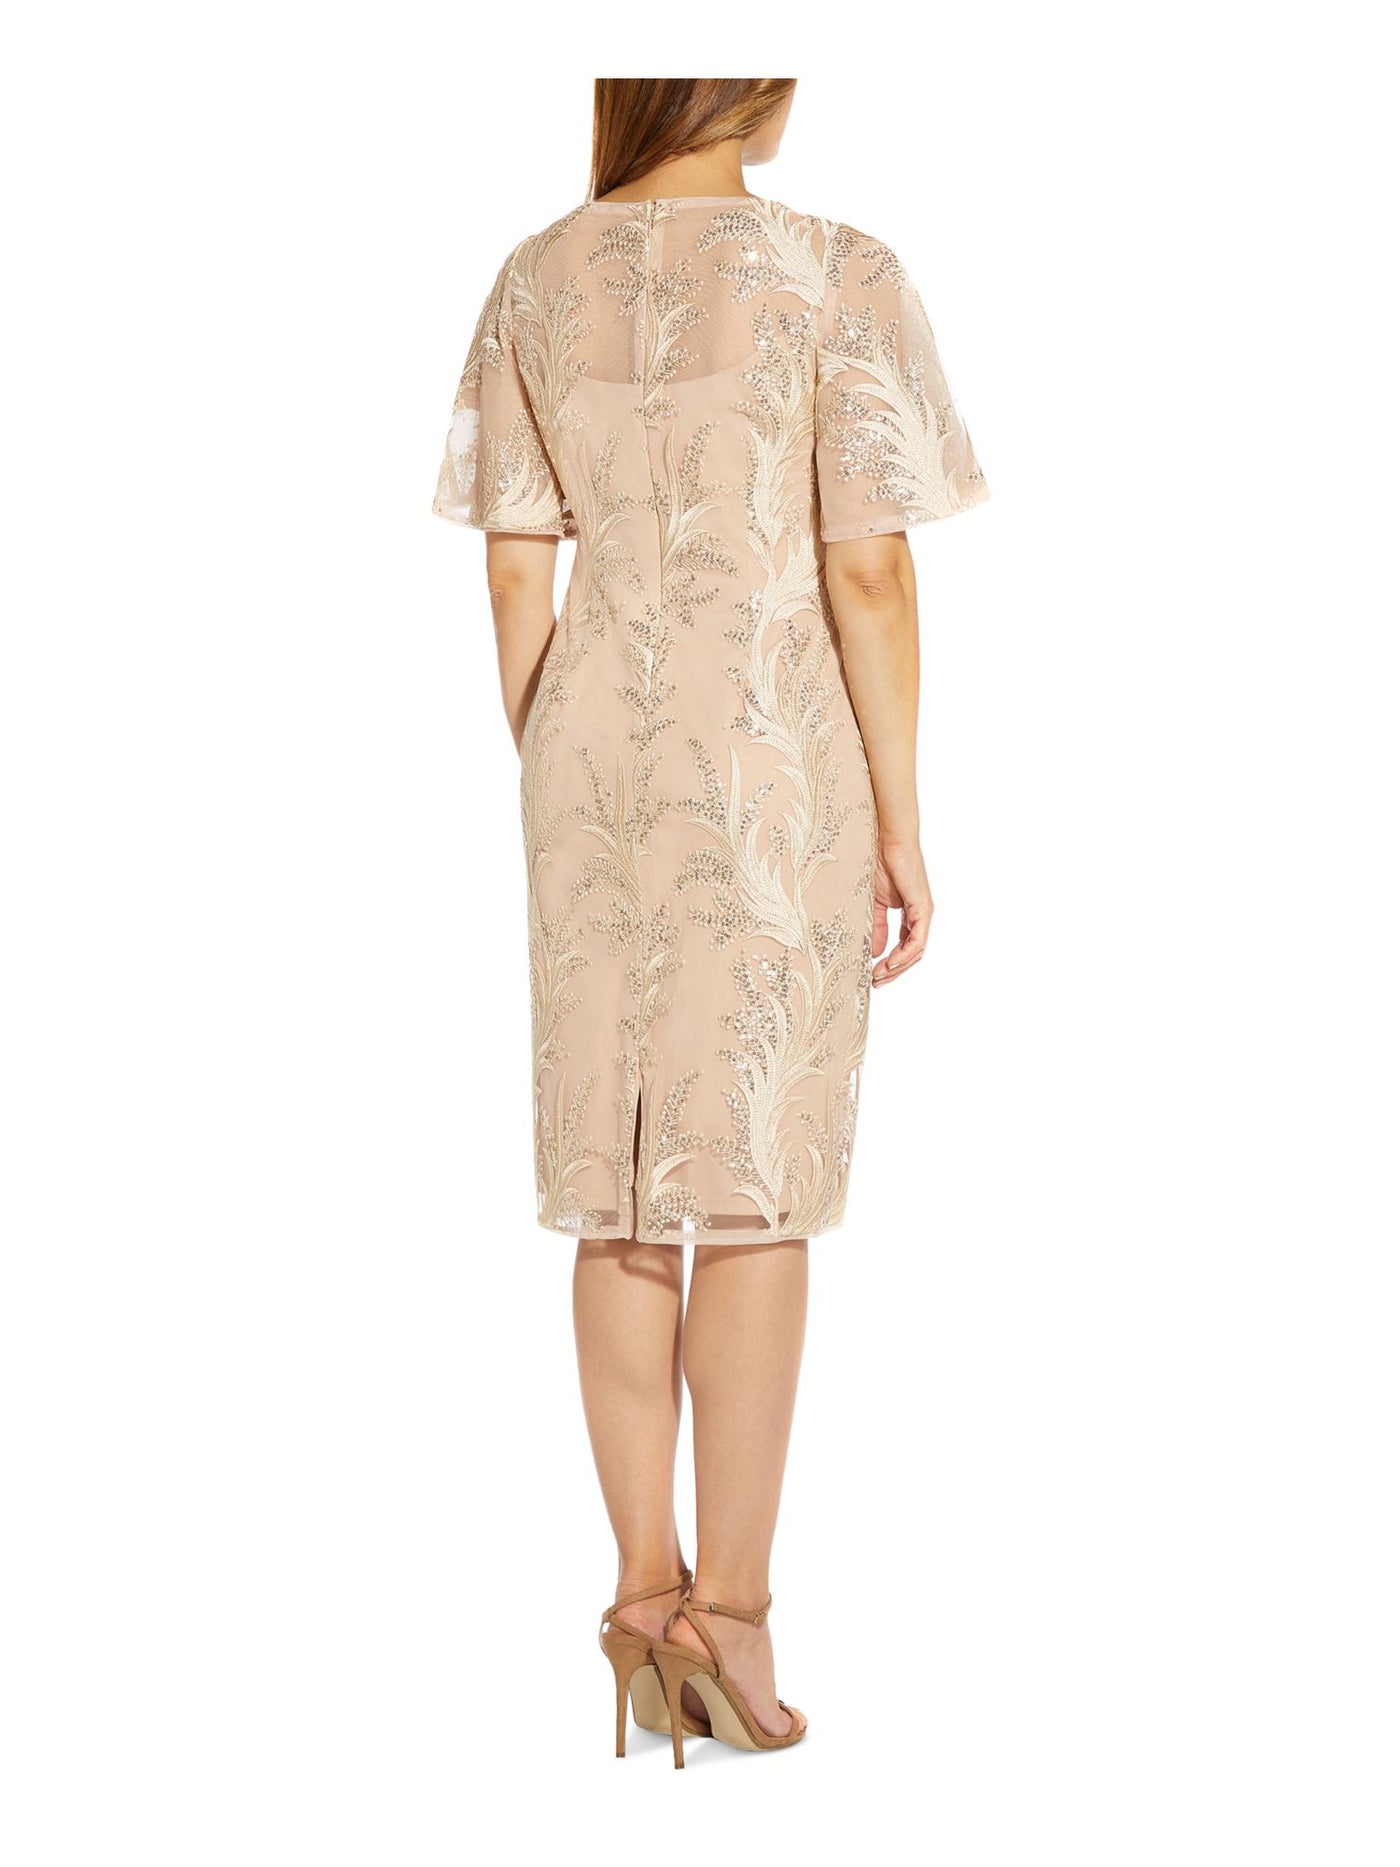 ADRIANNA PAPELL Womens Beige Sequined Embroidered Lined Zippered Flutter Sleeve Round Neck Knee Length Cocktail Sheath Dress 4